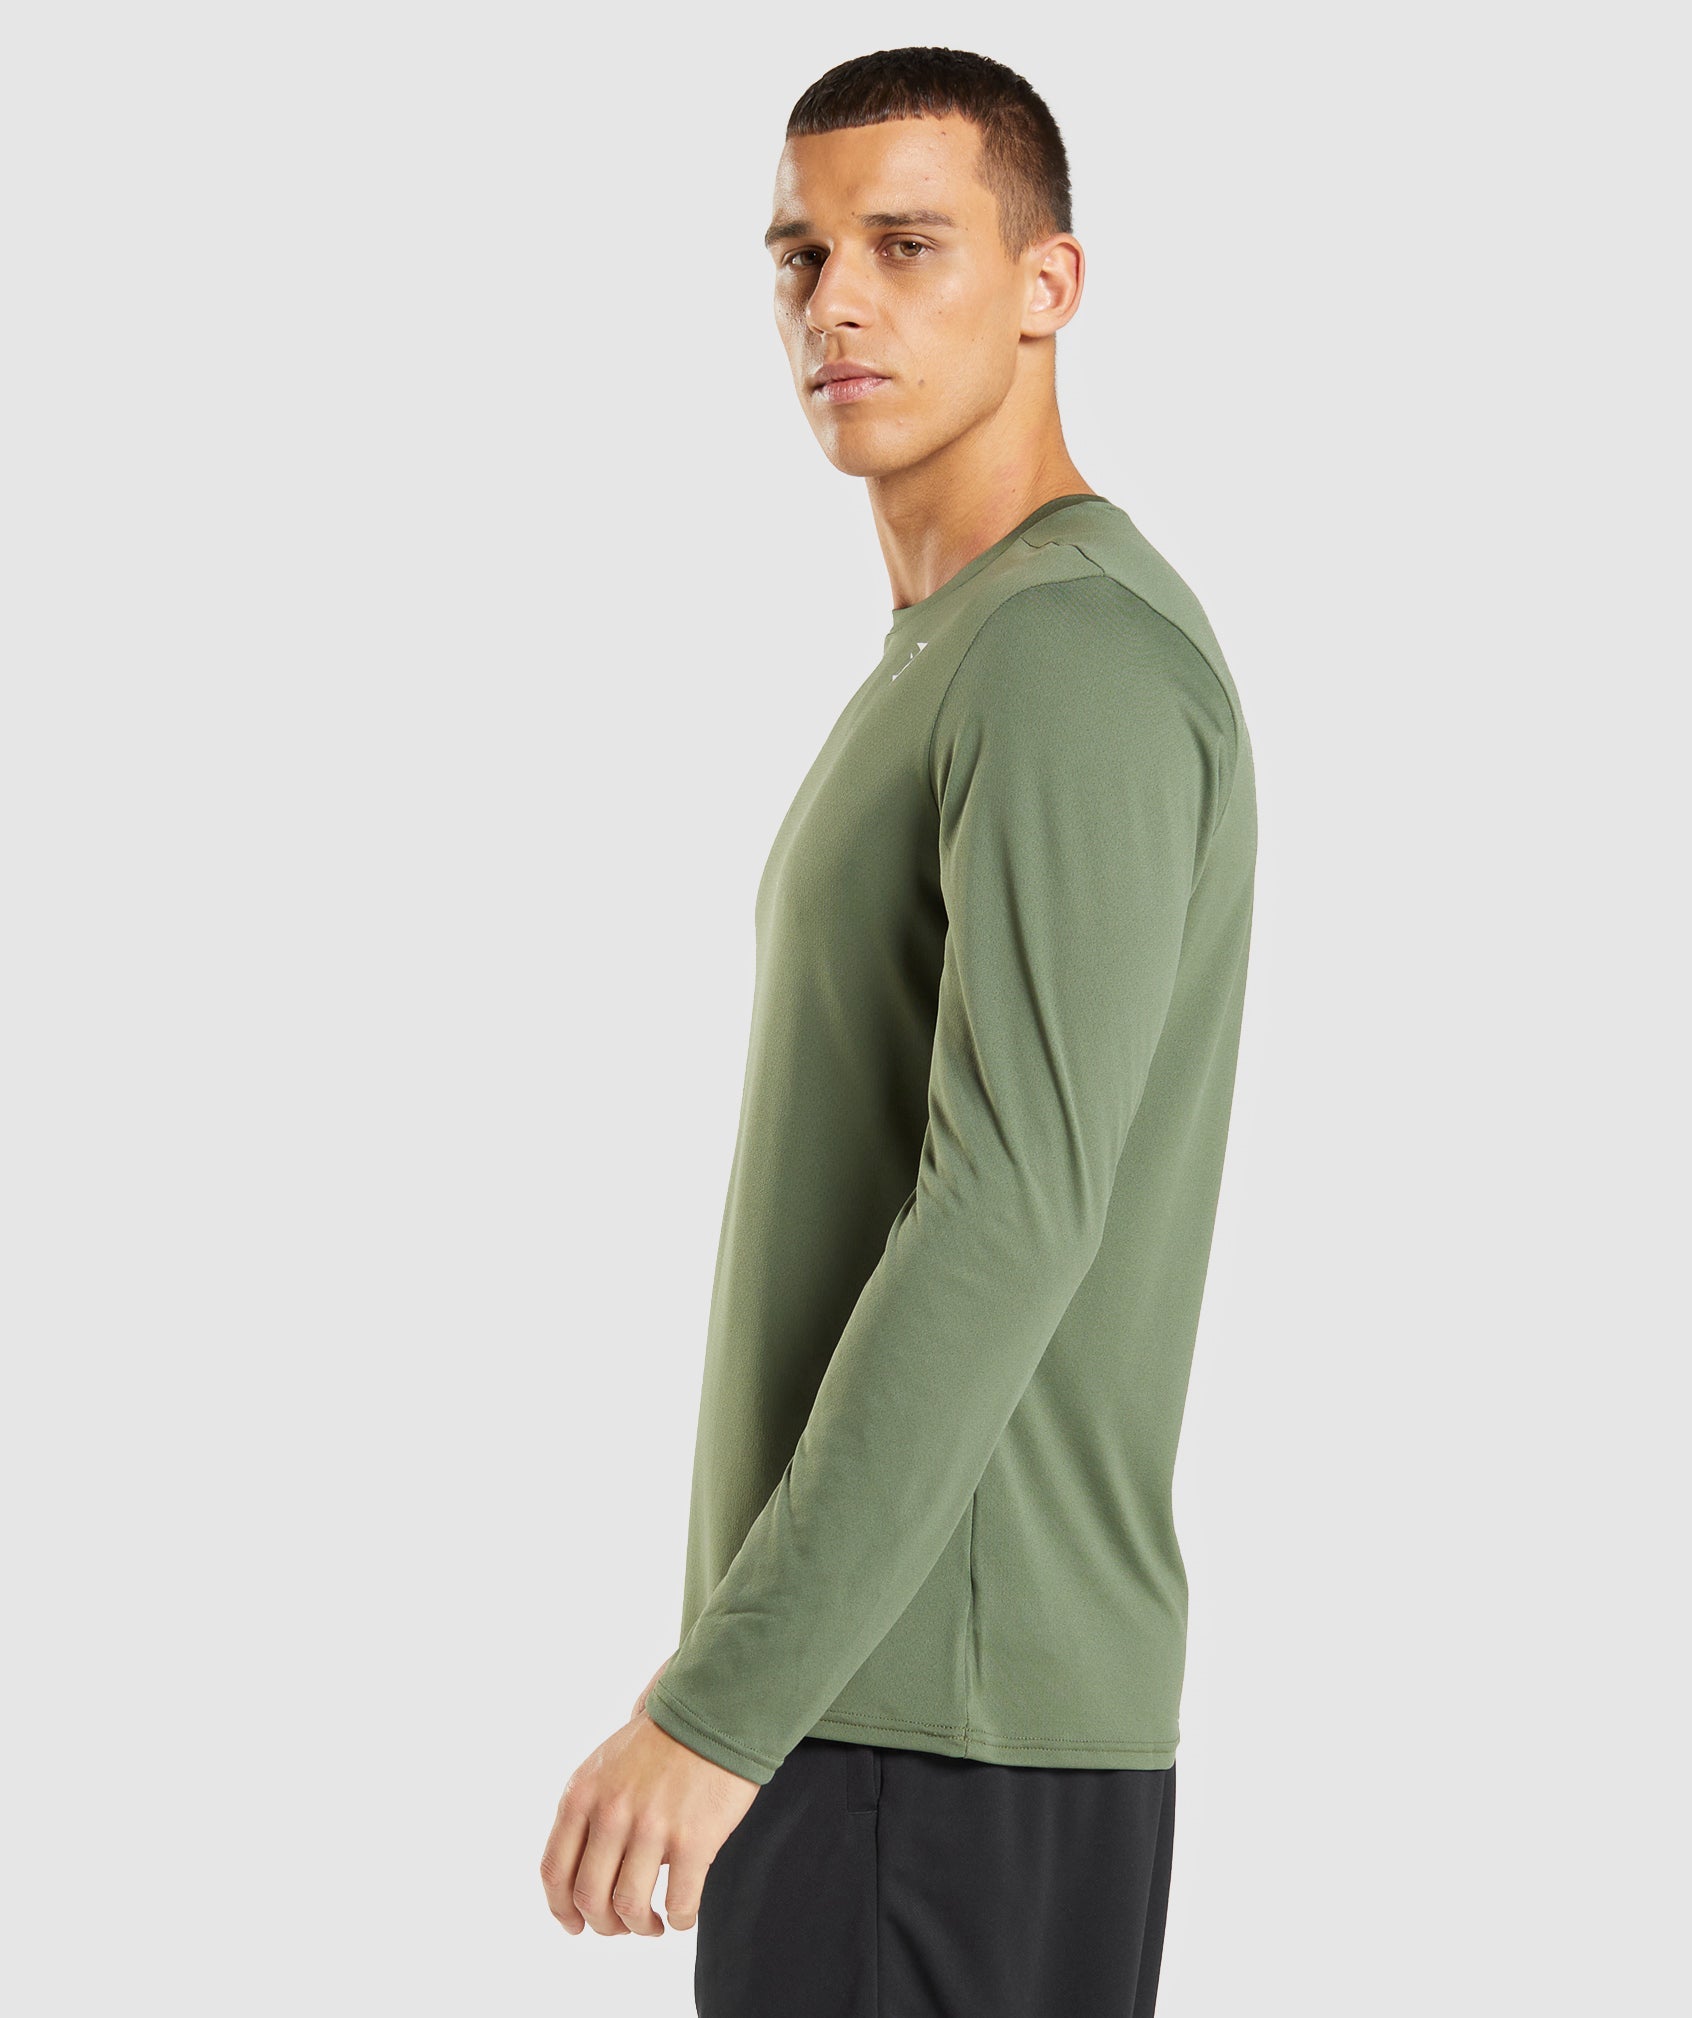 Arrival Long Sleeve T-Shirt in Core Olive - view 3